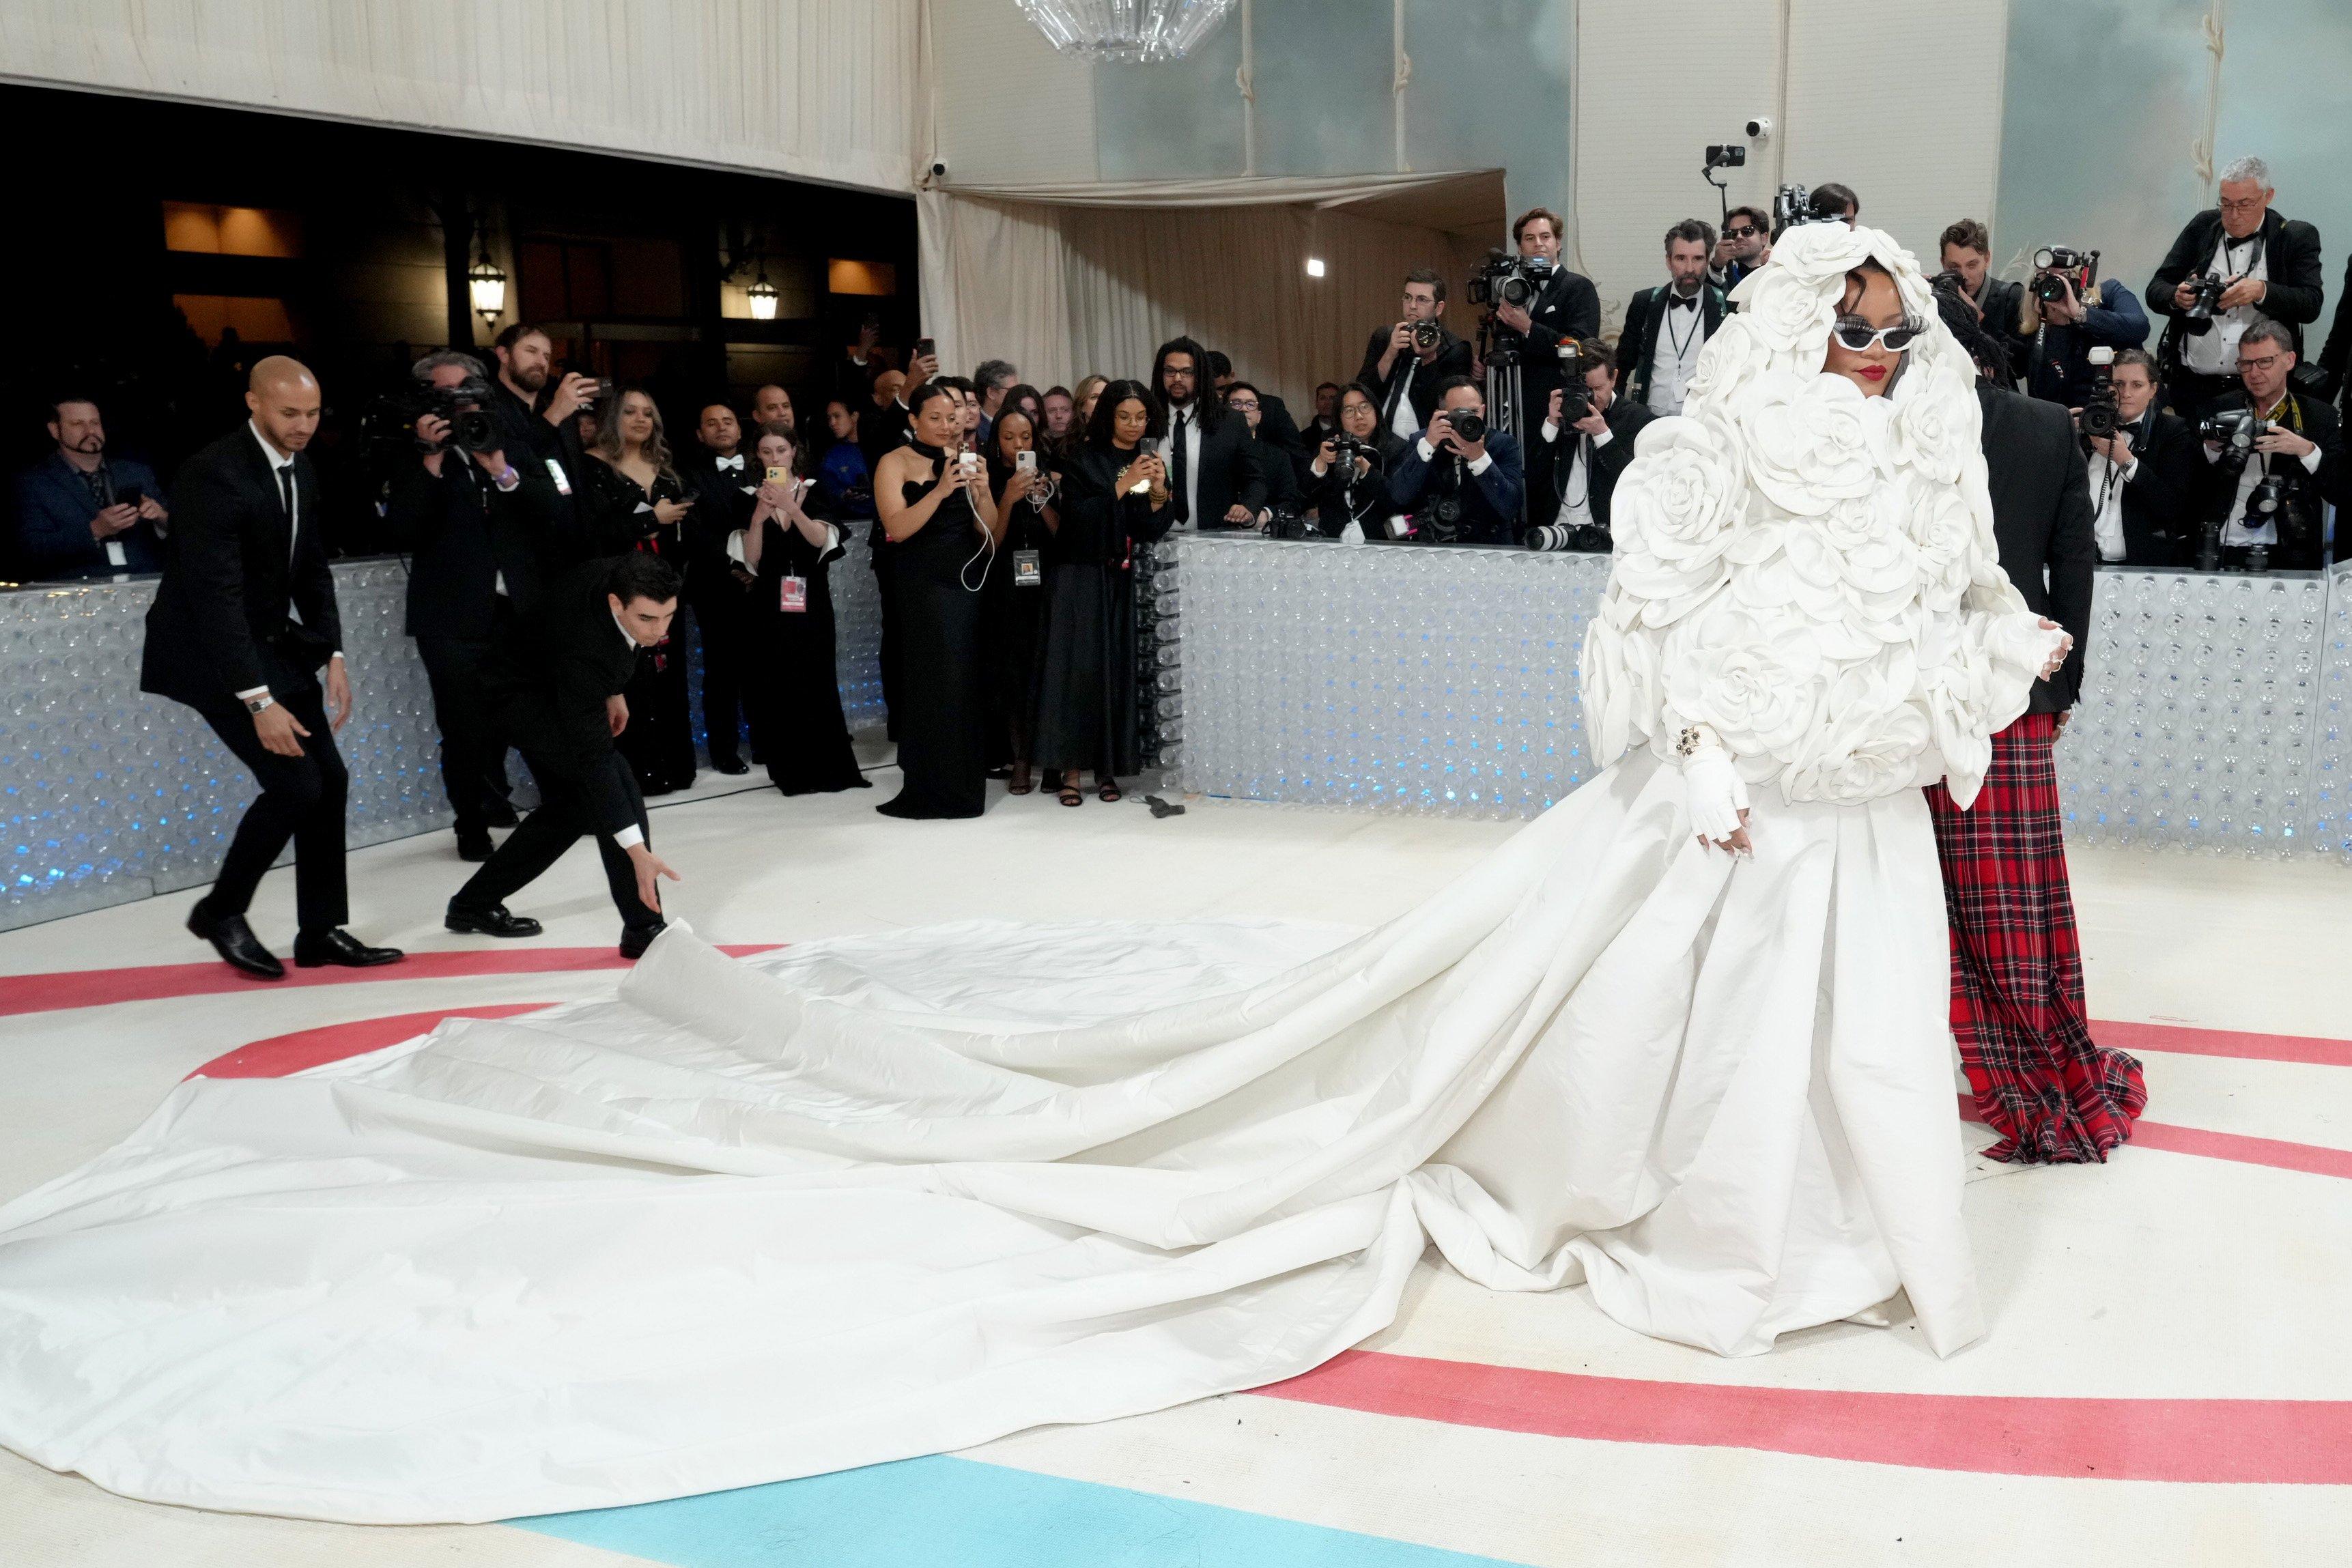 Met Gala 2023: All The Artists & Celebrities Who Served Fierce